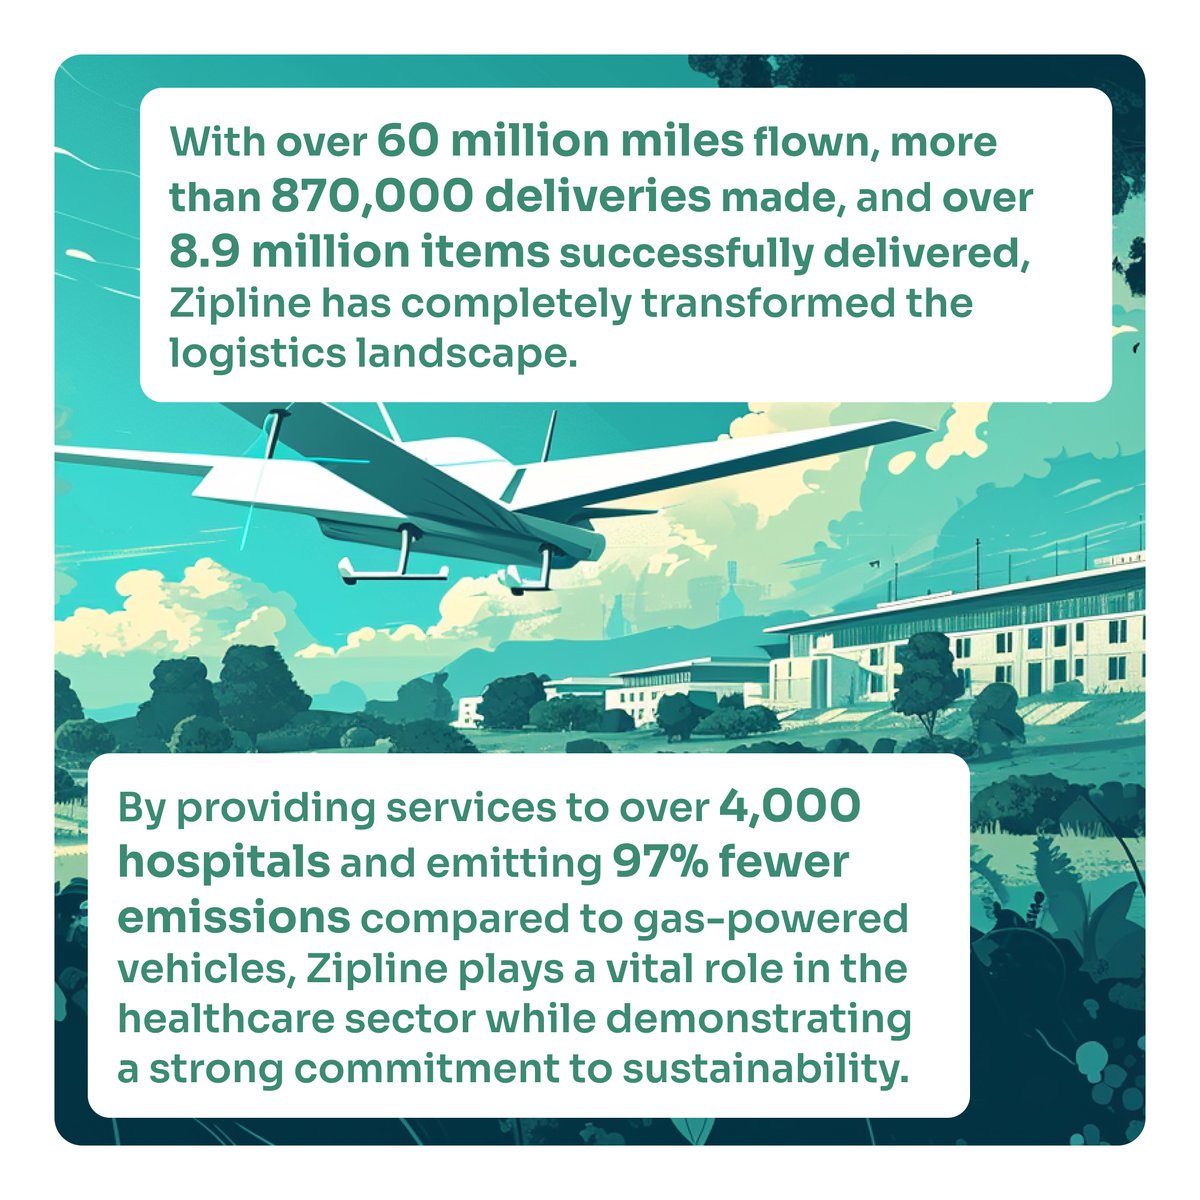 Zipline, a pioneering force in #greenlogistics, is transforming global access to healthcare, consumer products, & food via its innovative use of electric #autonomousdrones, embodying a commitment to #sustainability & efficiency that transcends traditional logistics boundaries.